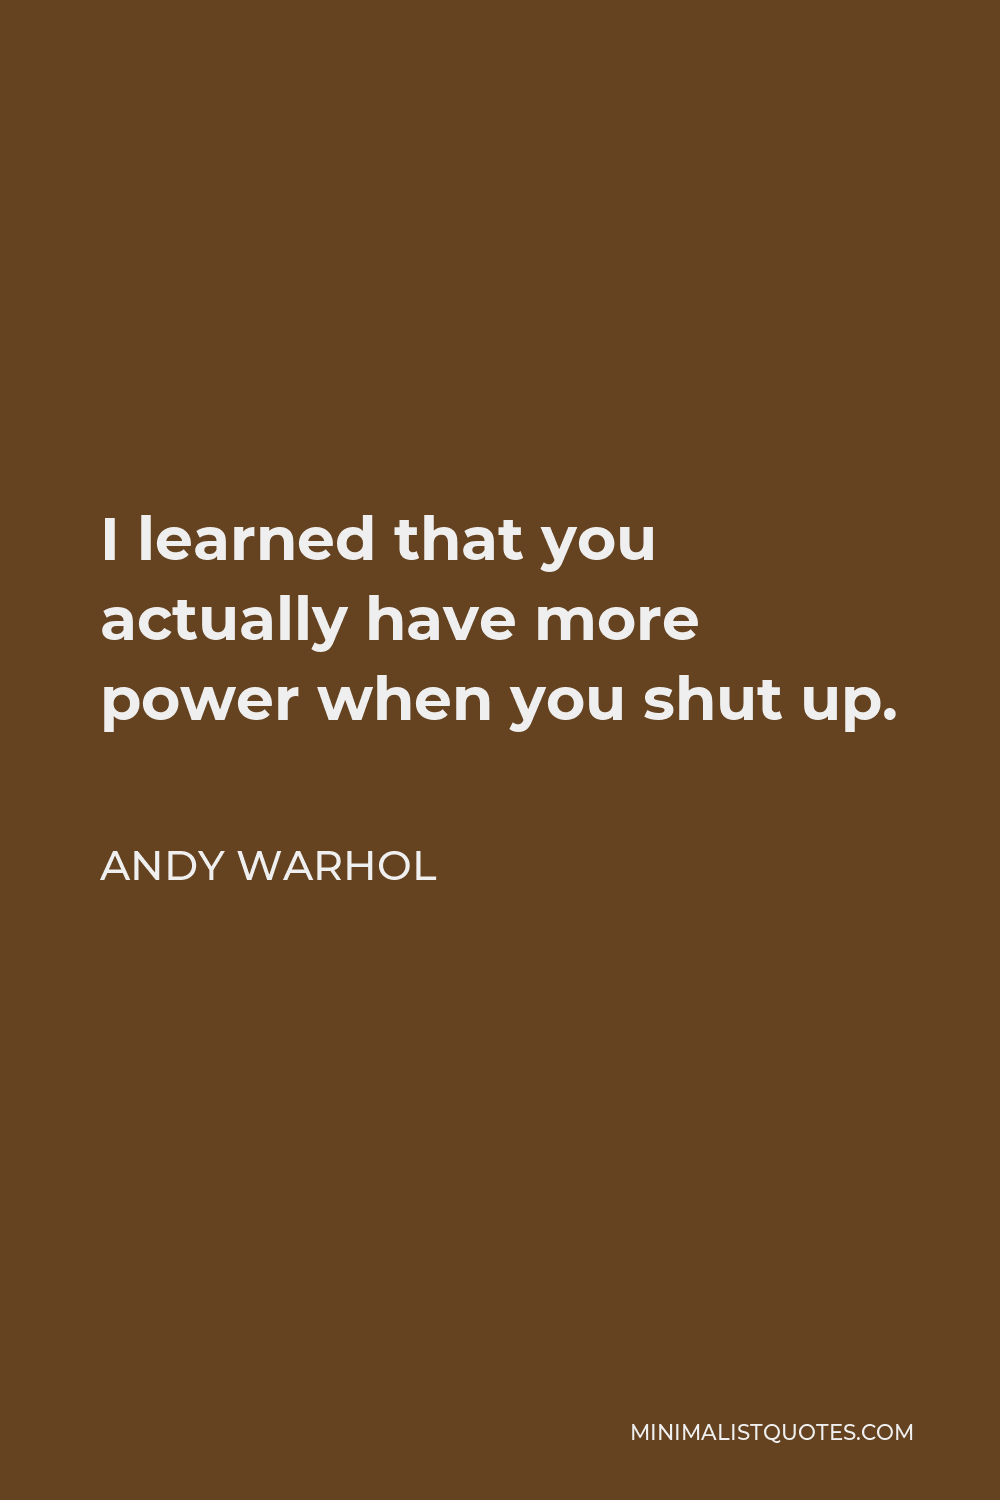 Andy Warhol Quote - I learned that you actually have more power when you shut up.